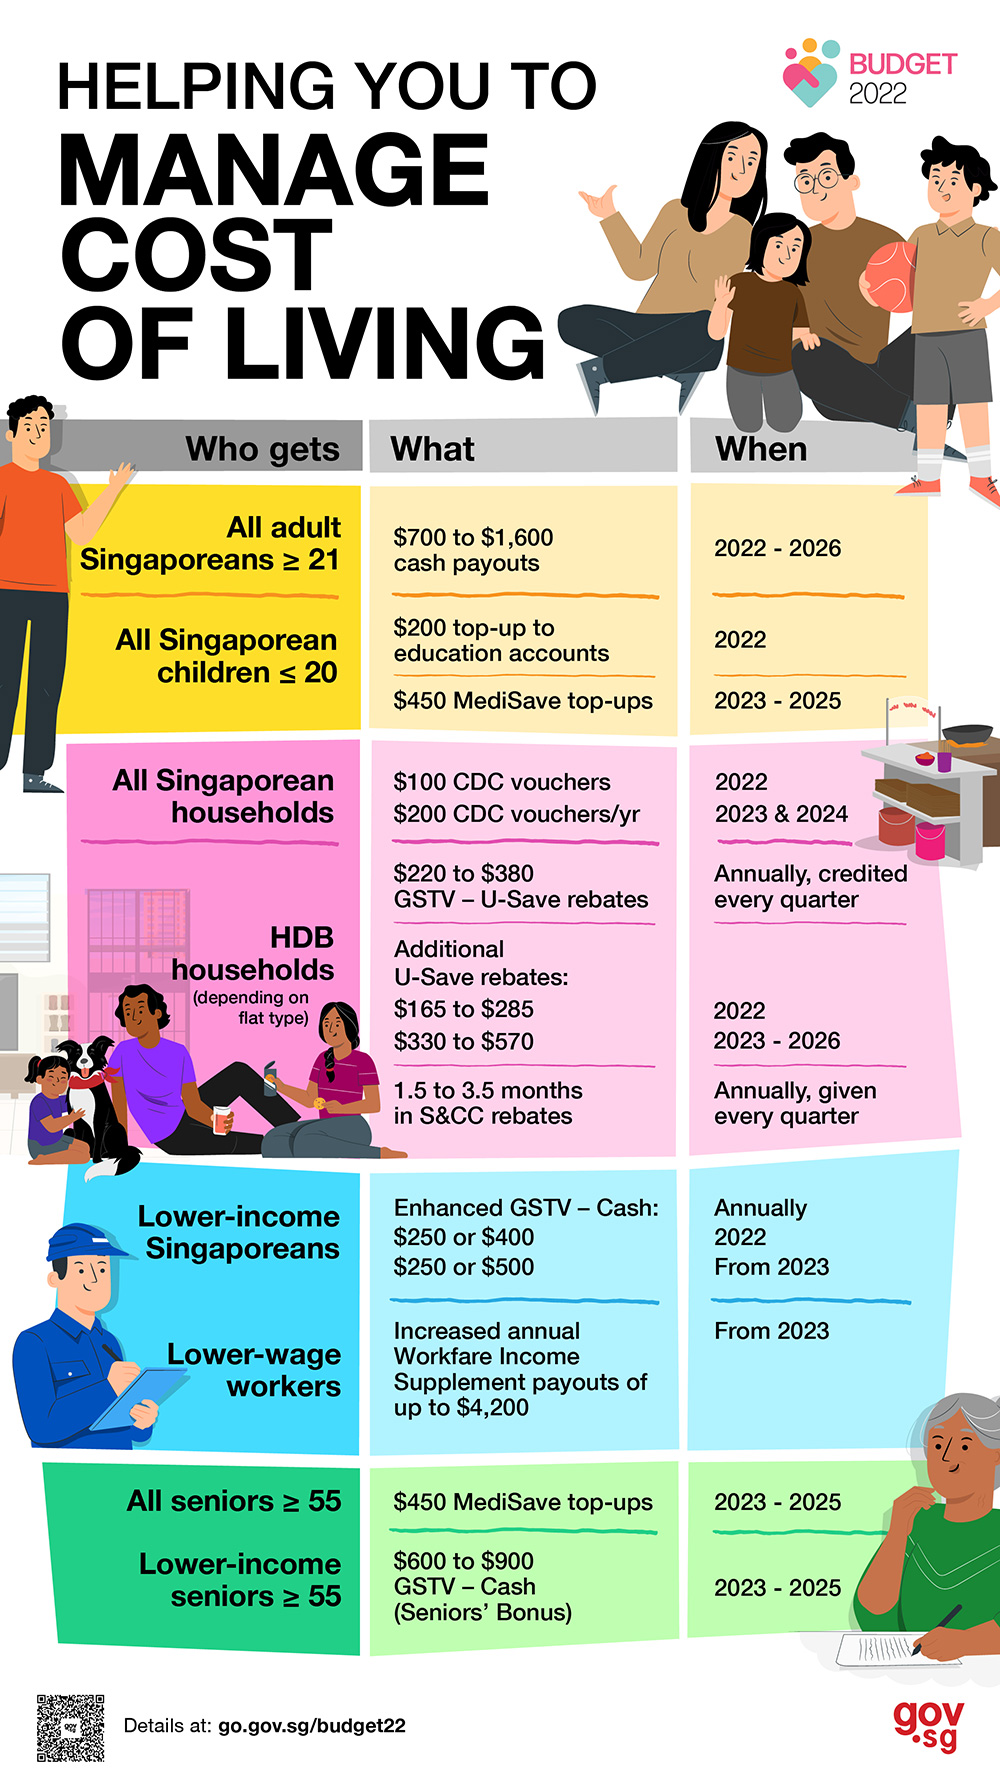 When and what Singaporeans are getting from the Government to help manage cost of living